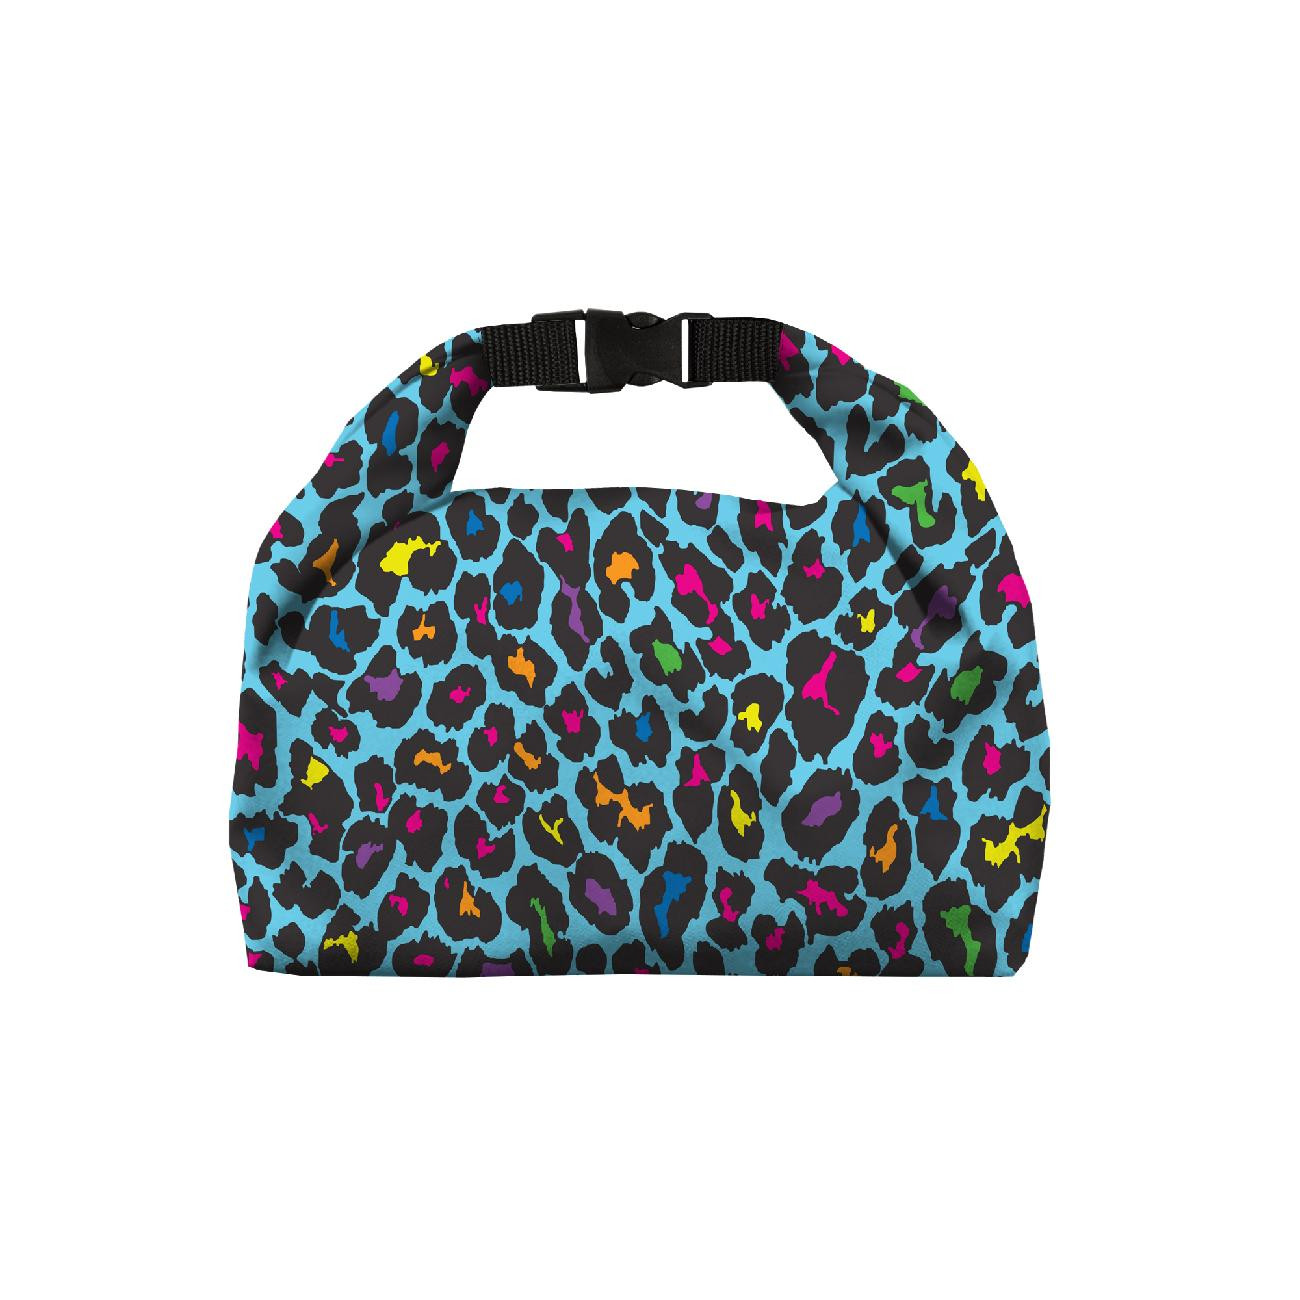 PUPIL PACKAGE - NEON LEOPARD PAT. 3 - sewing set